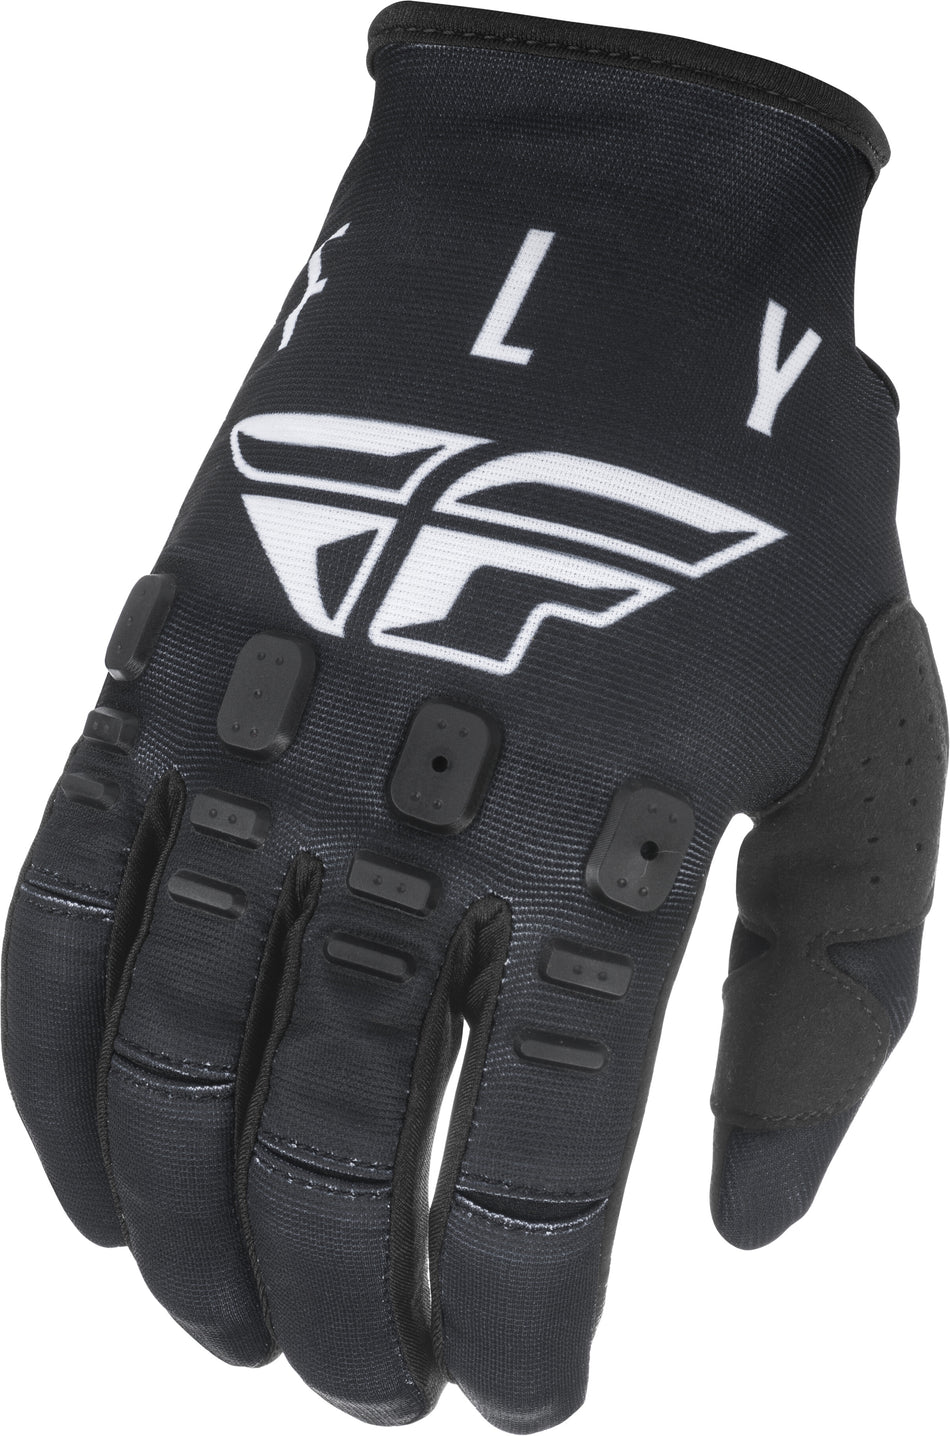 FLY RACING Youth Kinetic K121 Gloves Black/White Sz 04 374-41004